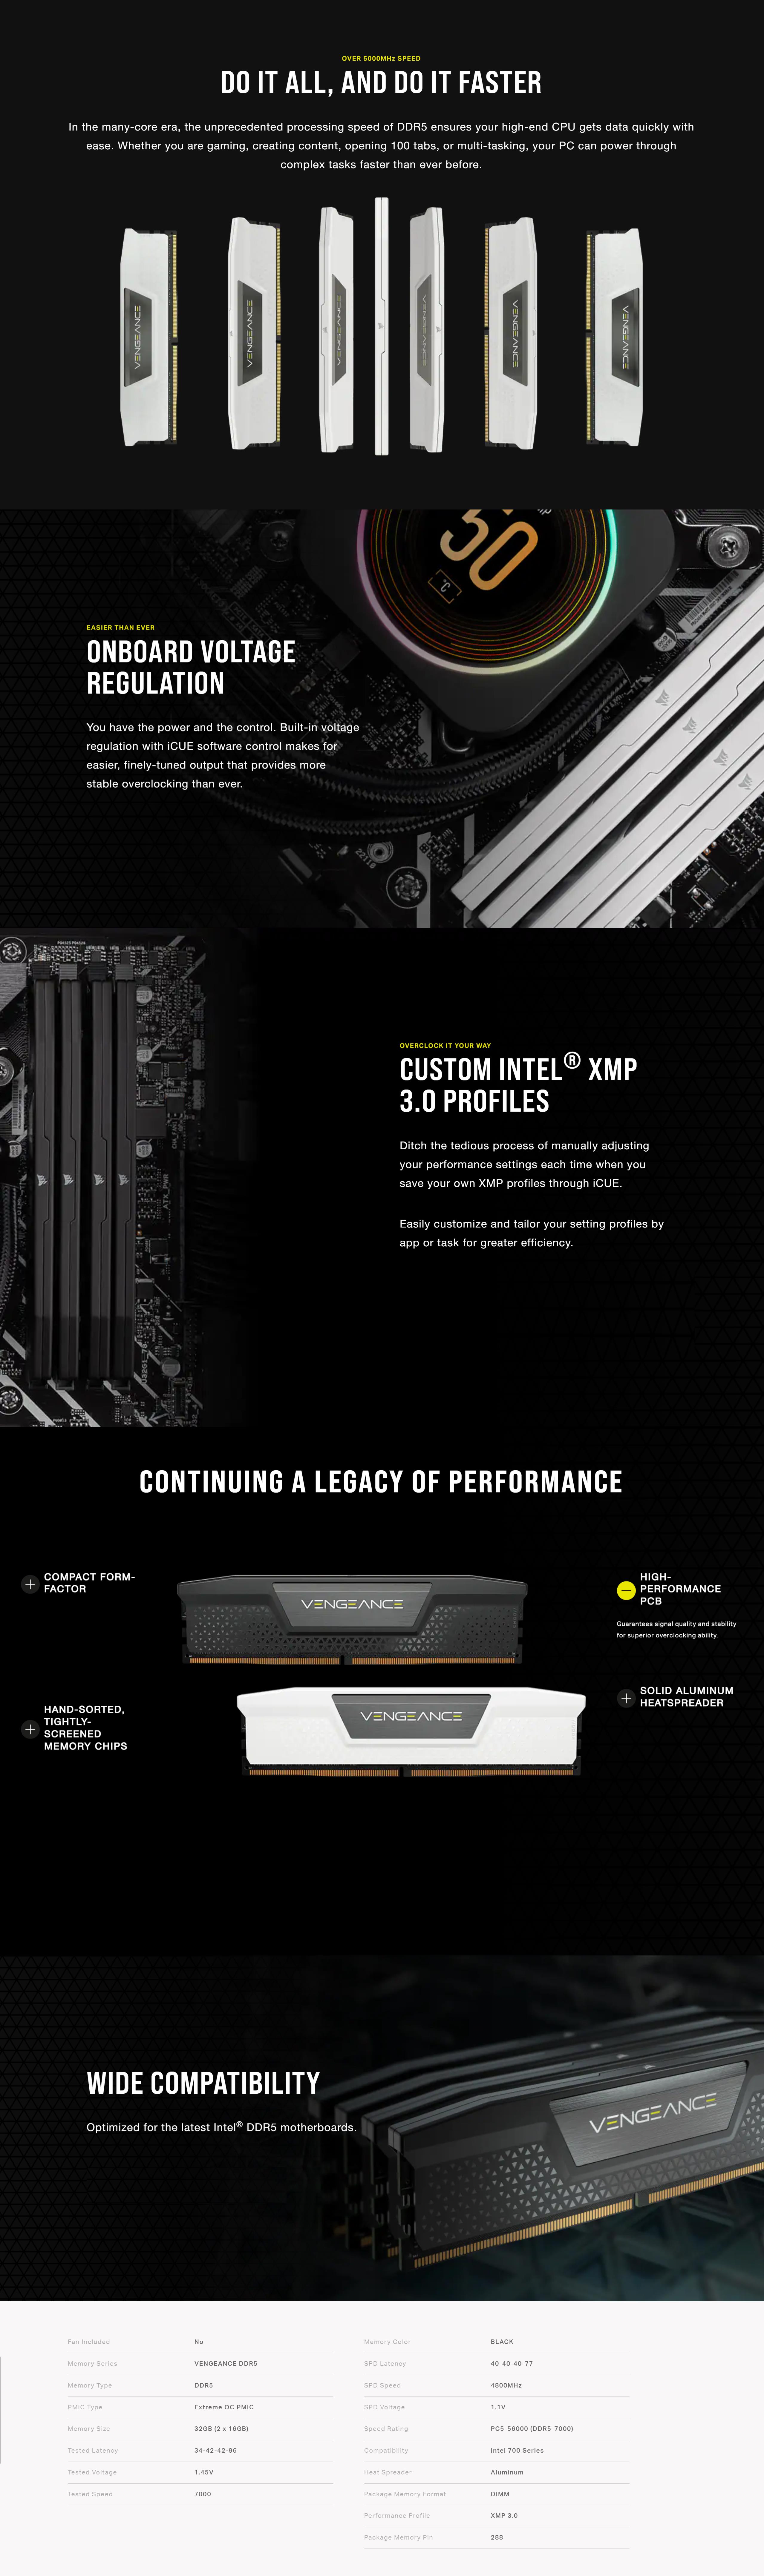 A large marketing image providing additional information about the product Corsair 32GB Kit (2x16GB) DDR5 Vengeance C34 7000MT/s - Black - Additional alt info not provided